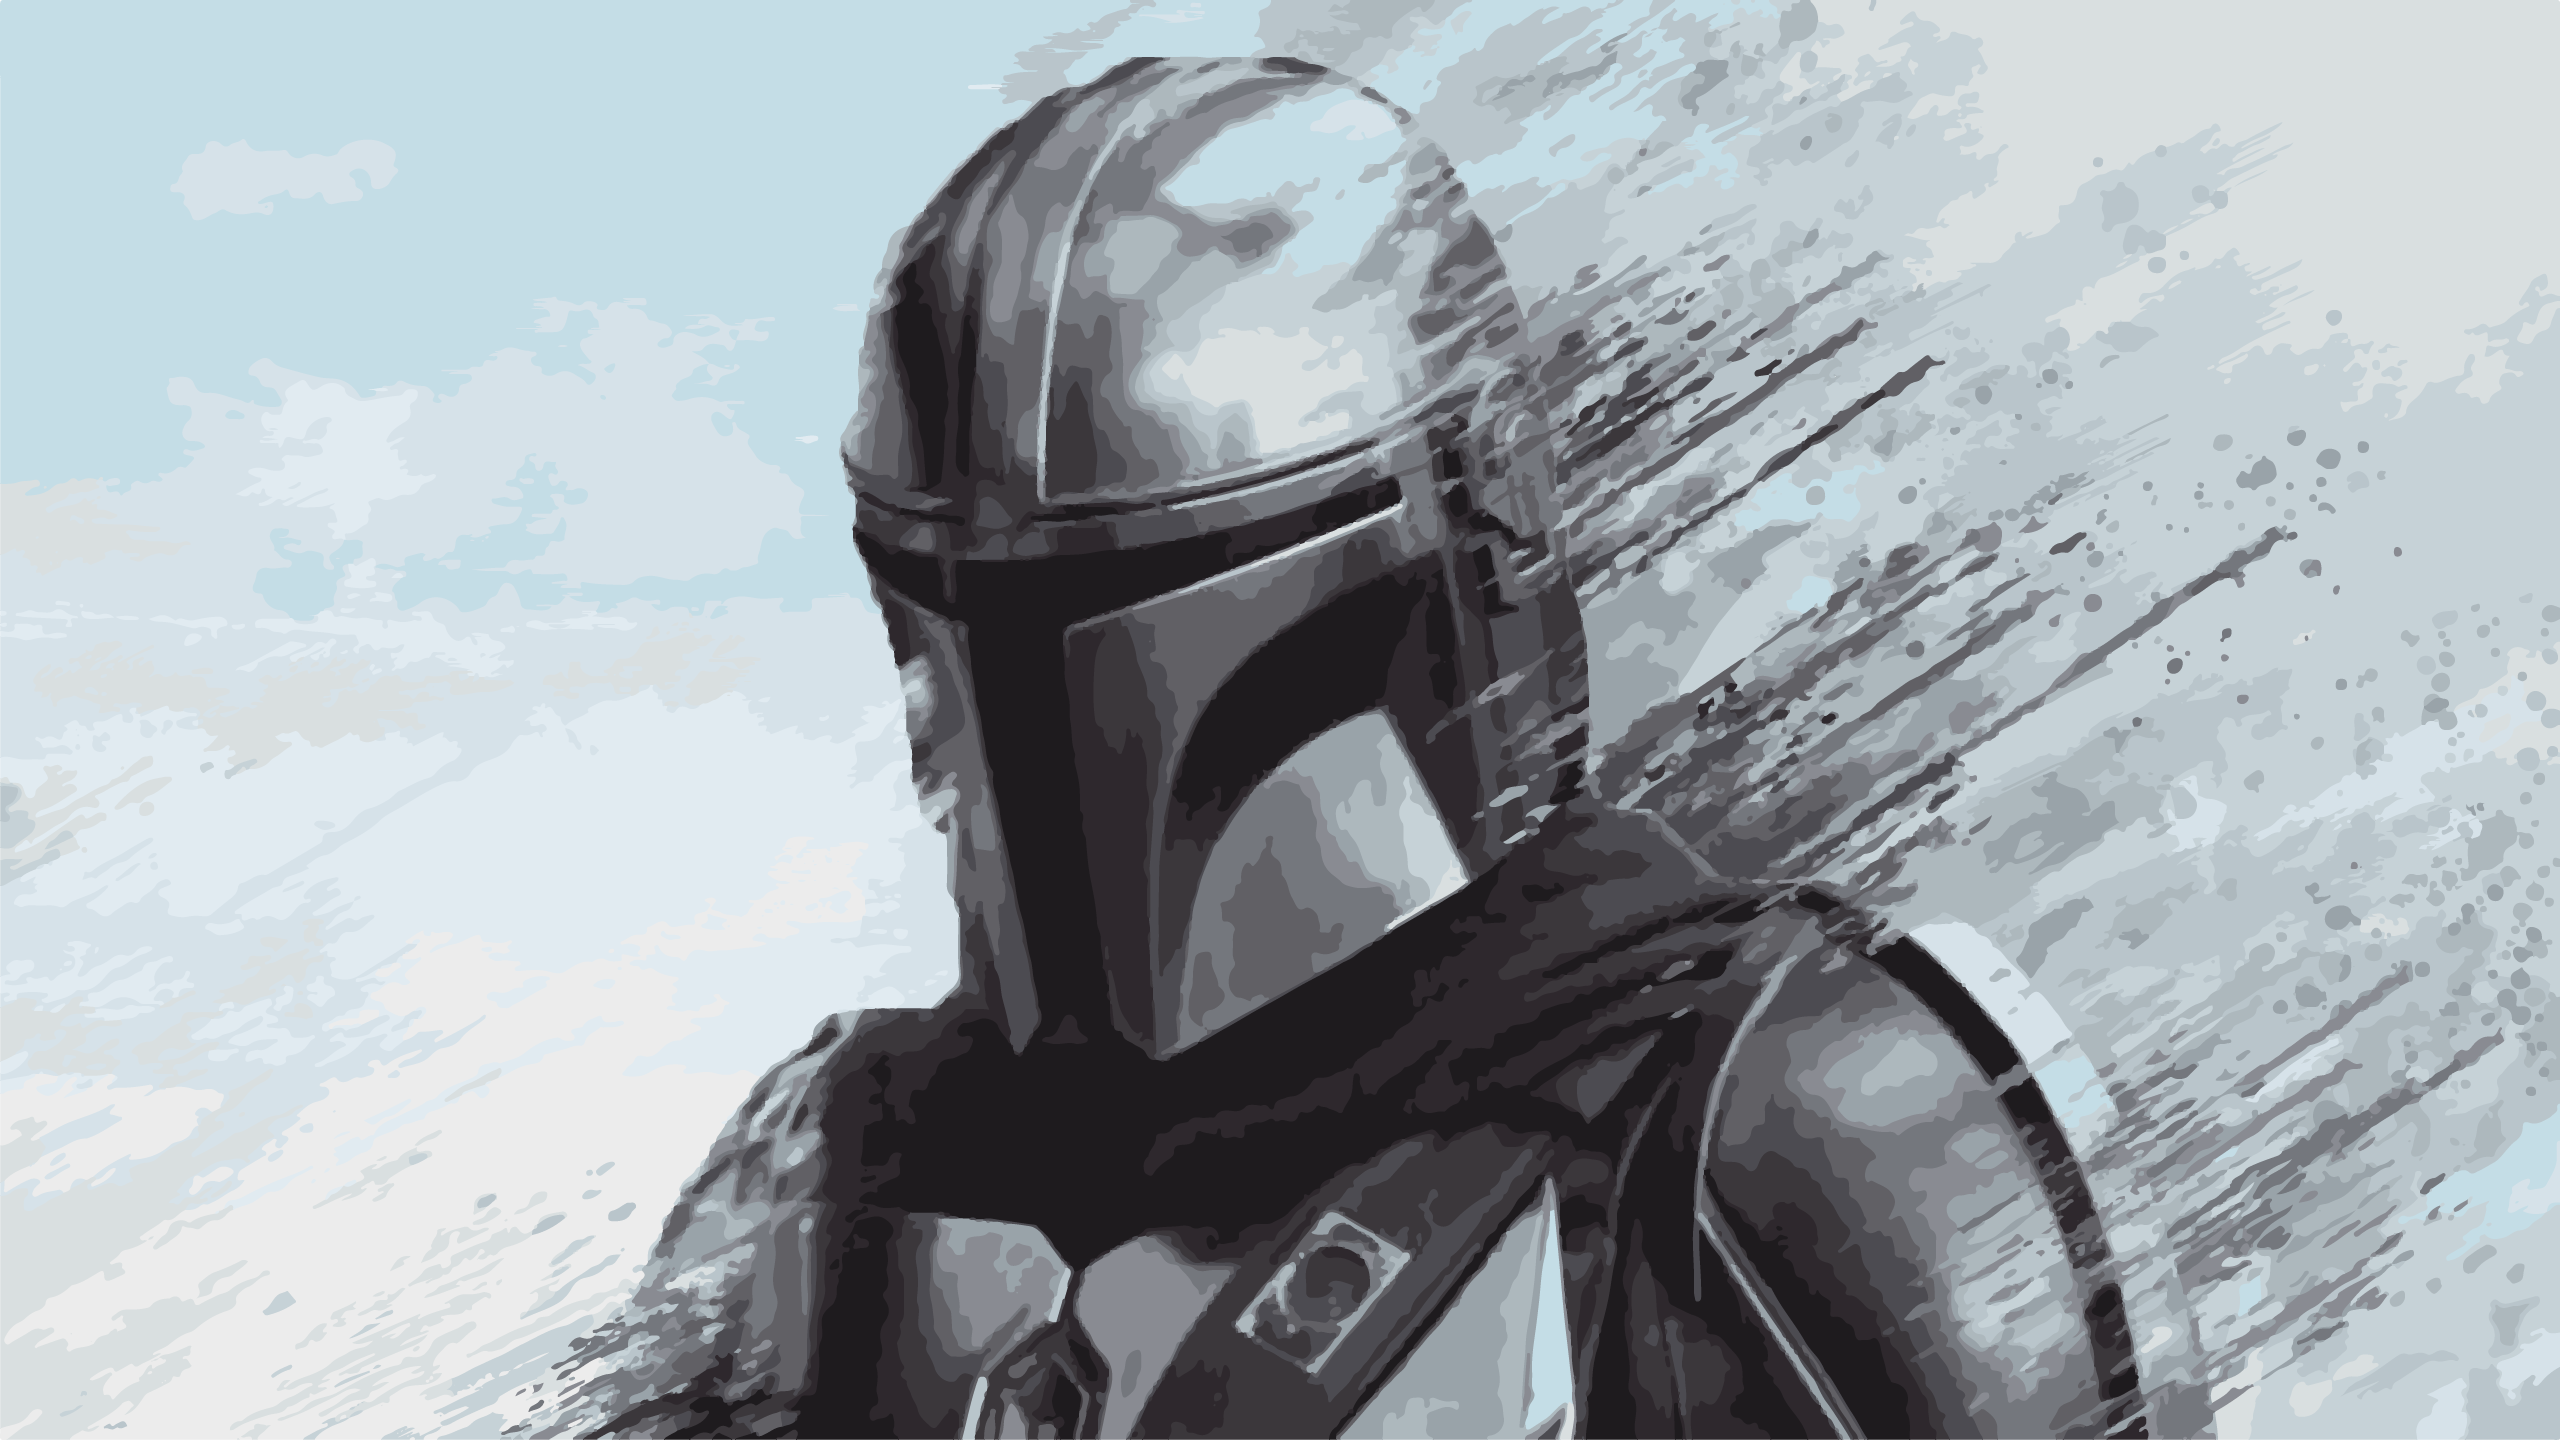 Mandalorian 4K wallpapers for your desktop or mobile screen free and easy to download